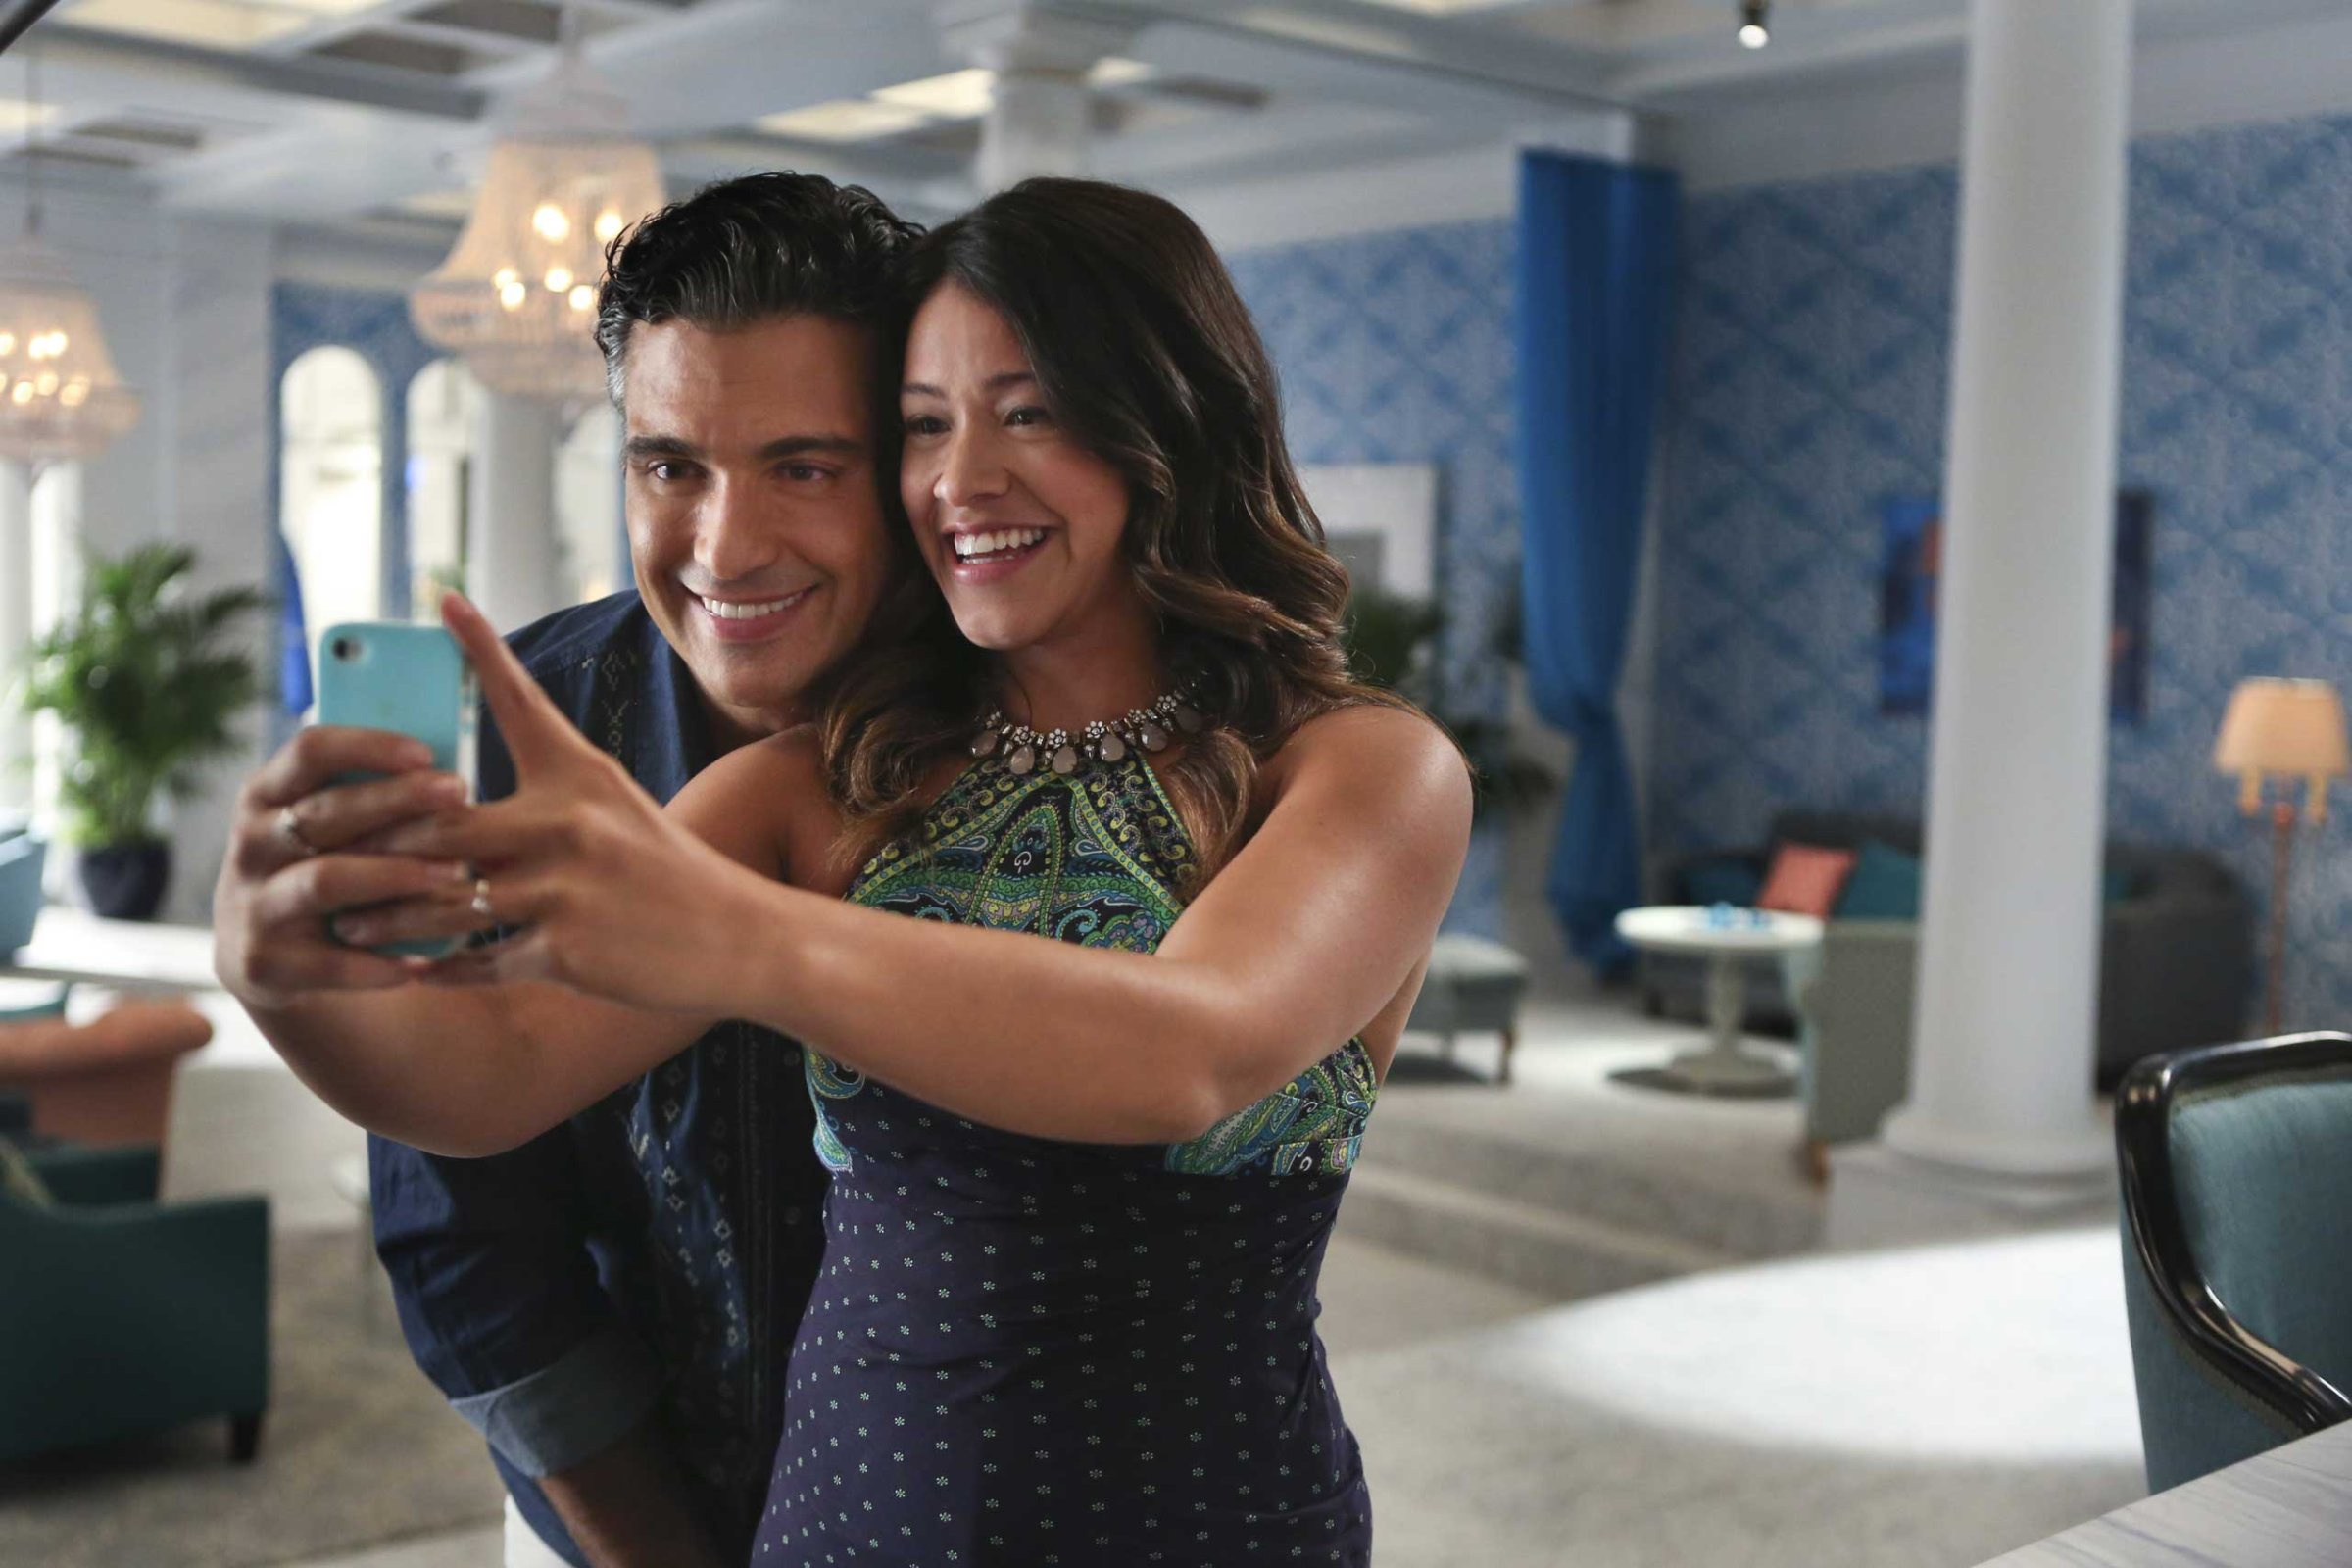 Jaime Camil as Rogelio and Gina Rodriguez as Jane in Jane The Virgin.